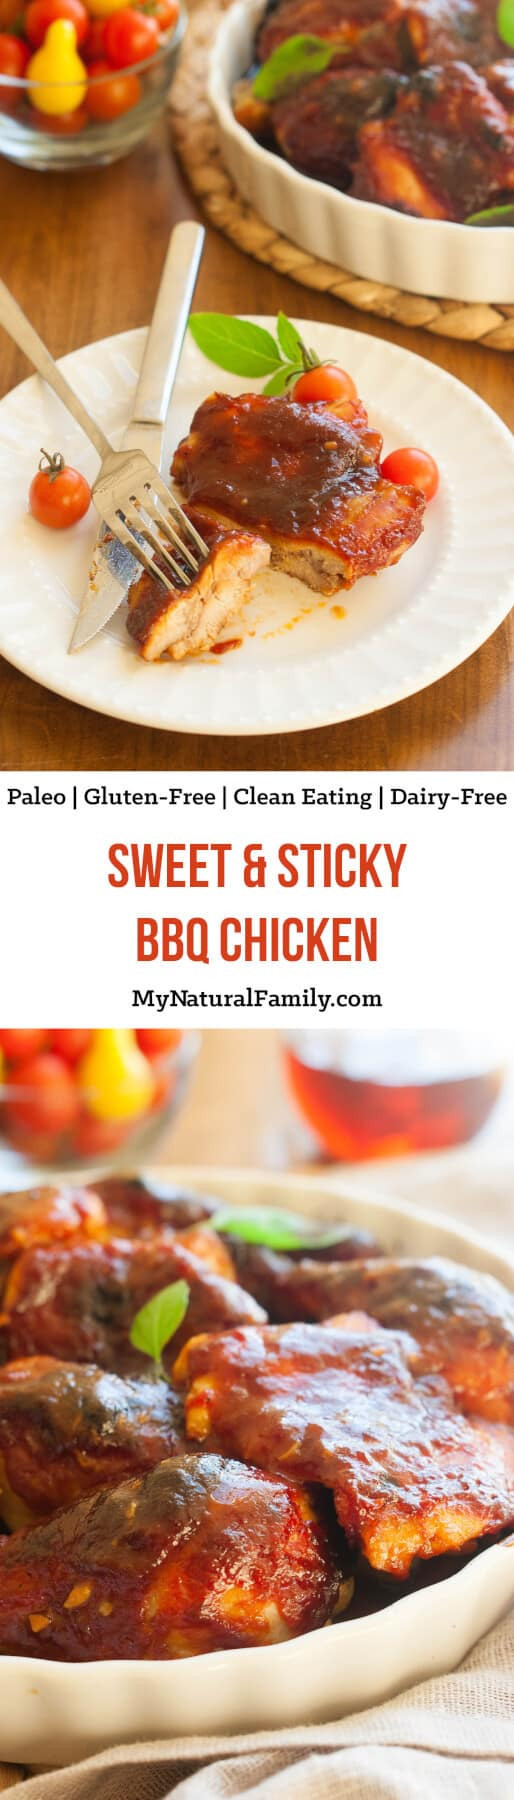 Dairy Free Chicken Recipes
 25 Easy Gluten Free Chicken Recipes for a Month